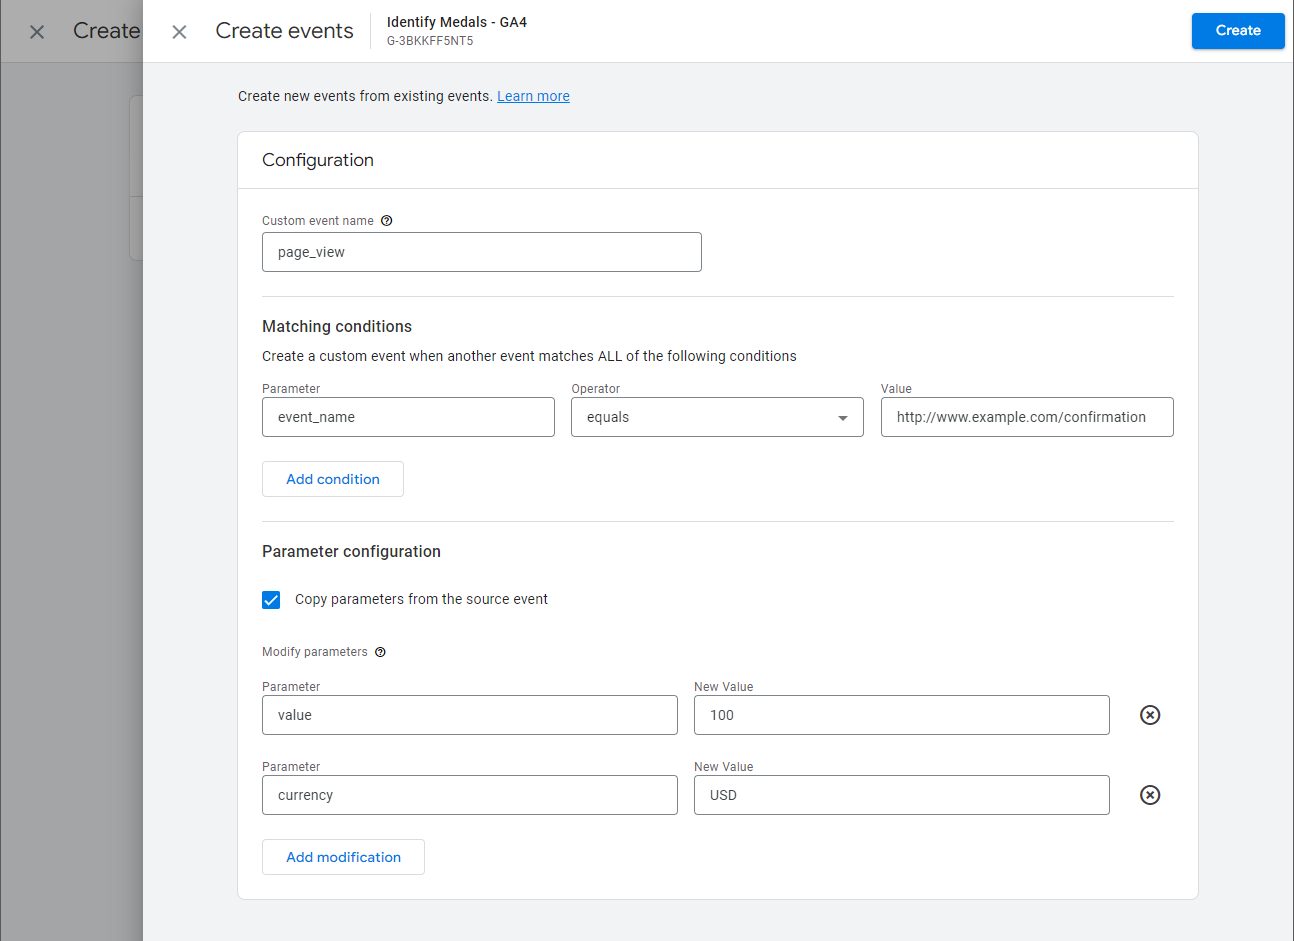 Defining the matching conditions and parameters of a conversion event in Google Analytics.